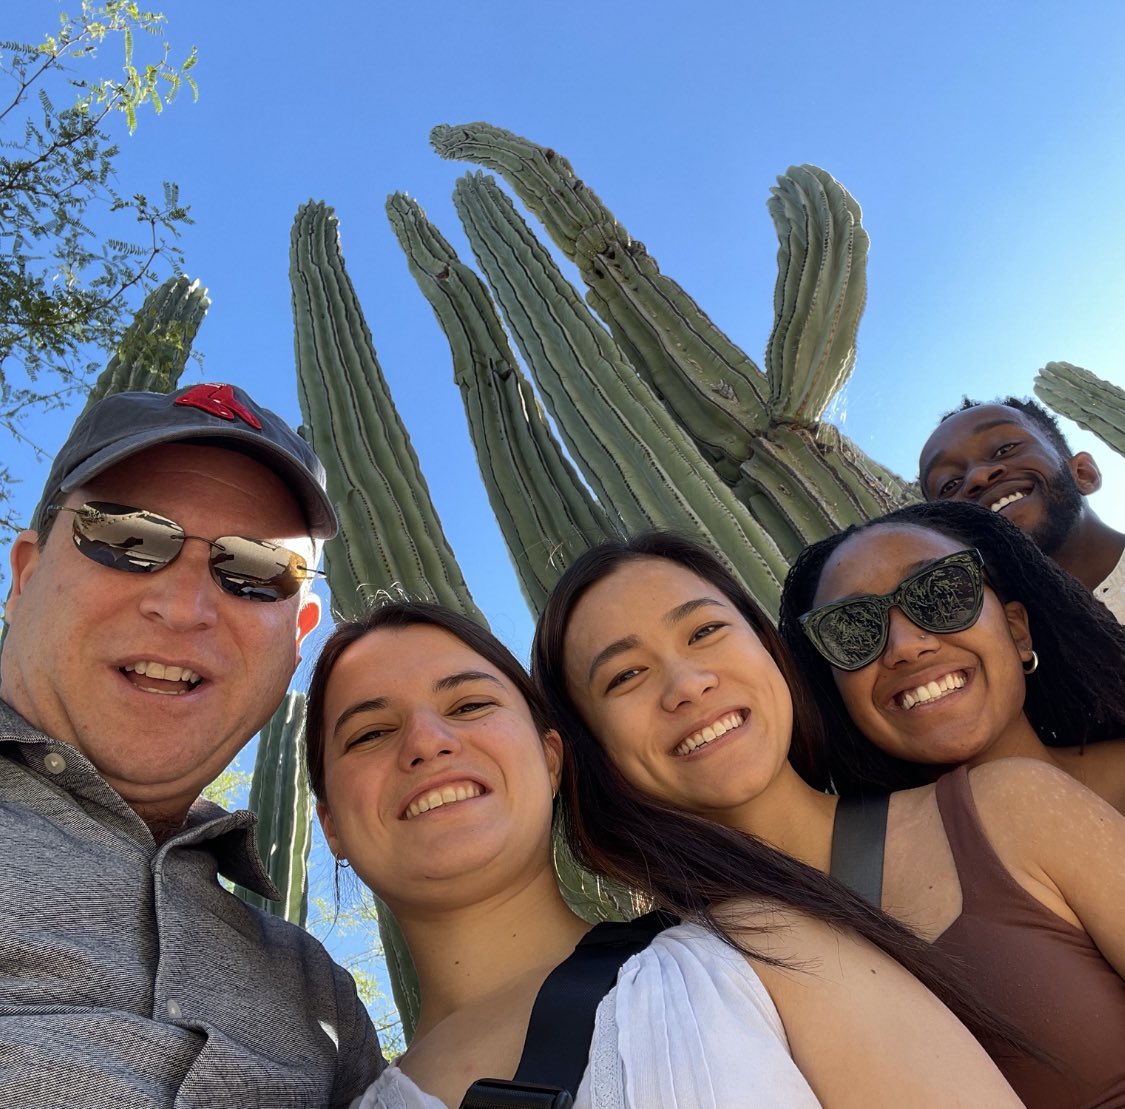 A truly inspiring 2023 @ABRCMS meeting in Phoenix. Love to spread enthusiasm about the physician-scientist career and the @HarvardMITmdphd program with our amazing students representing history of science, neuroscience, engineering, and immunology. Got to see some saguaros too!